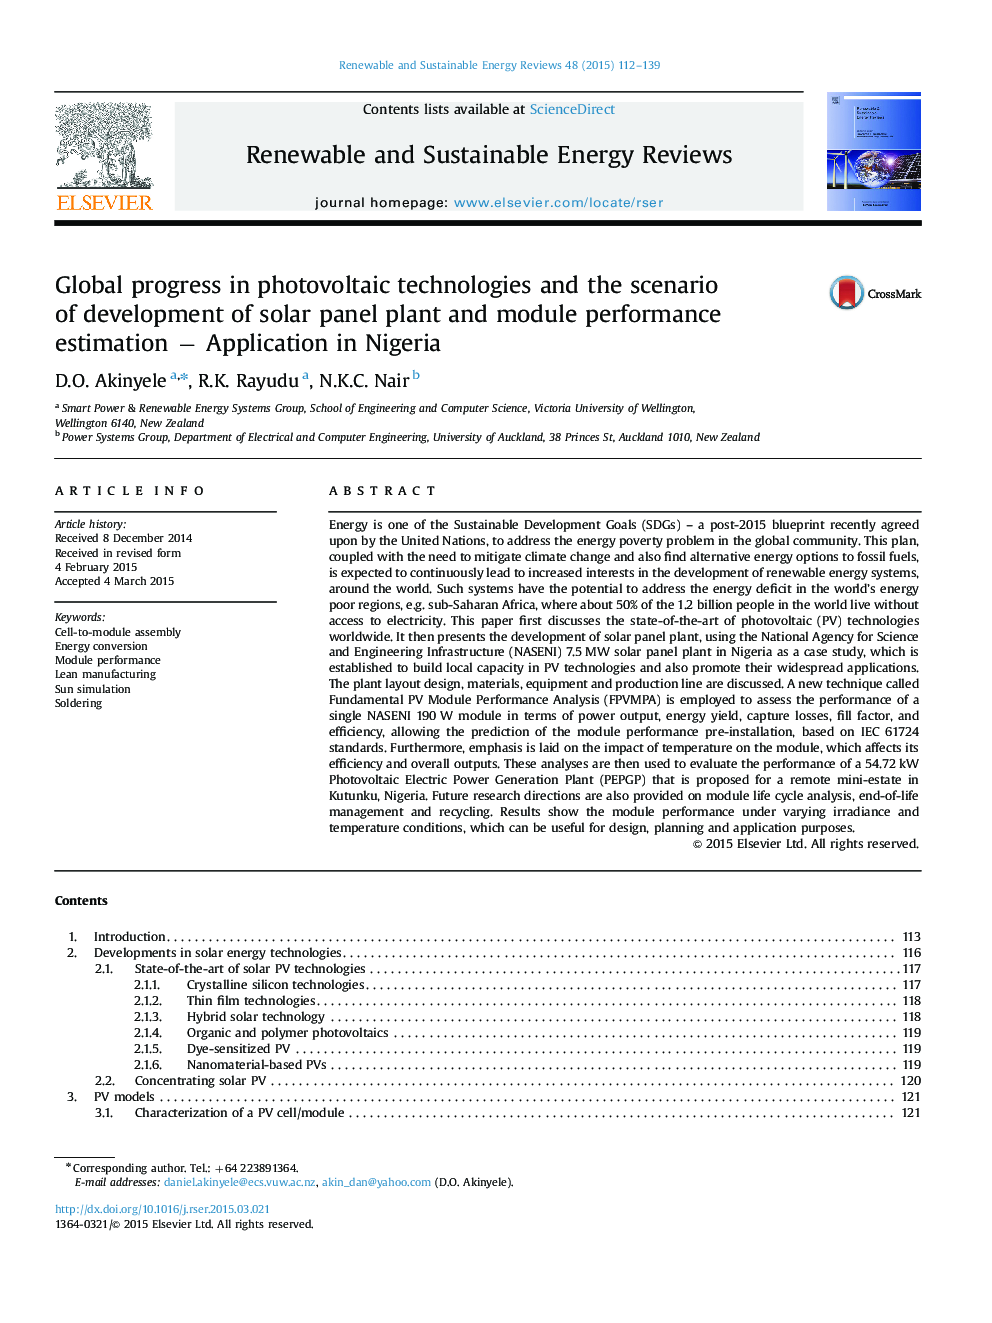 Global progress in photovoltaic technologies and the scenario of development of solar panel plant and module performance estimation â Application in Nigeria